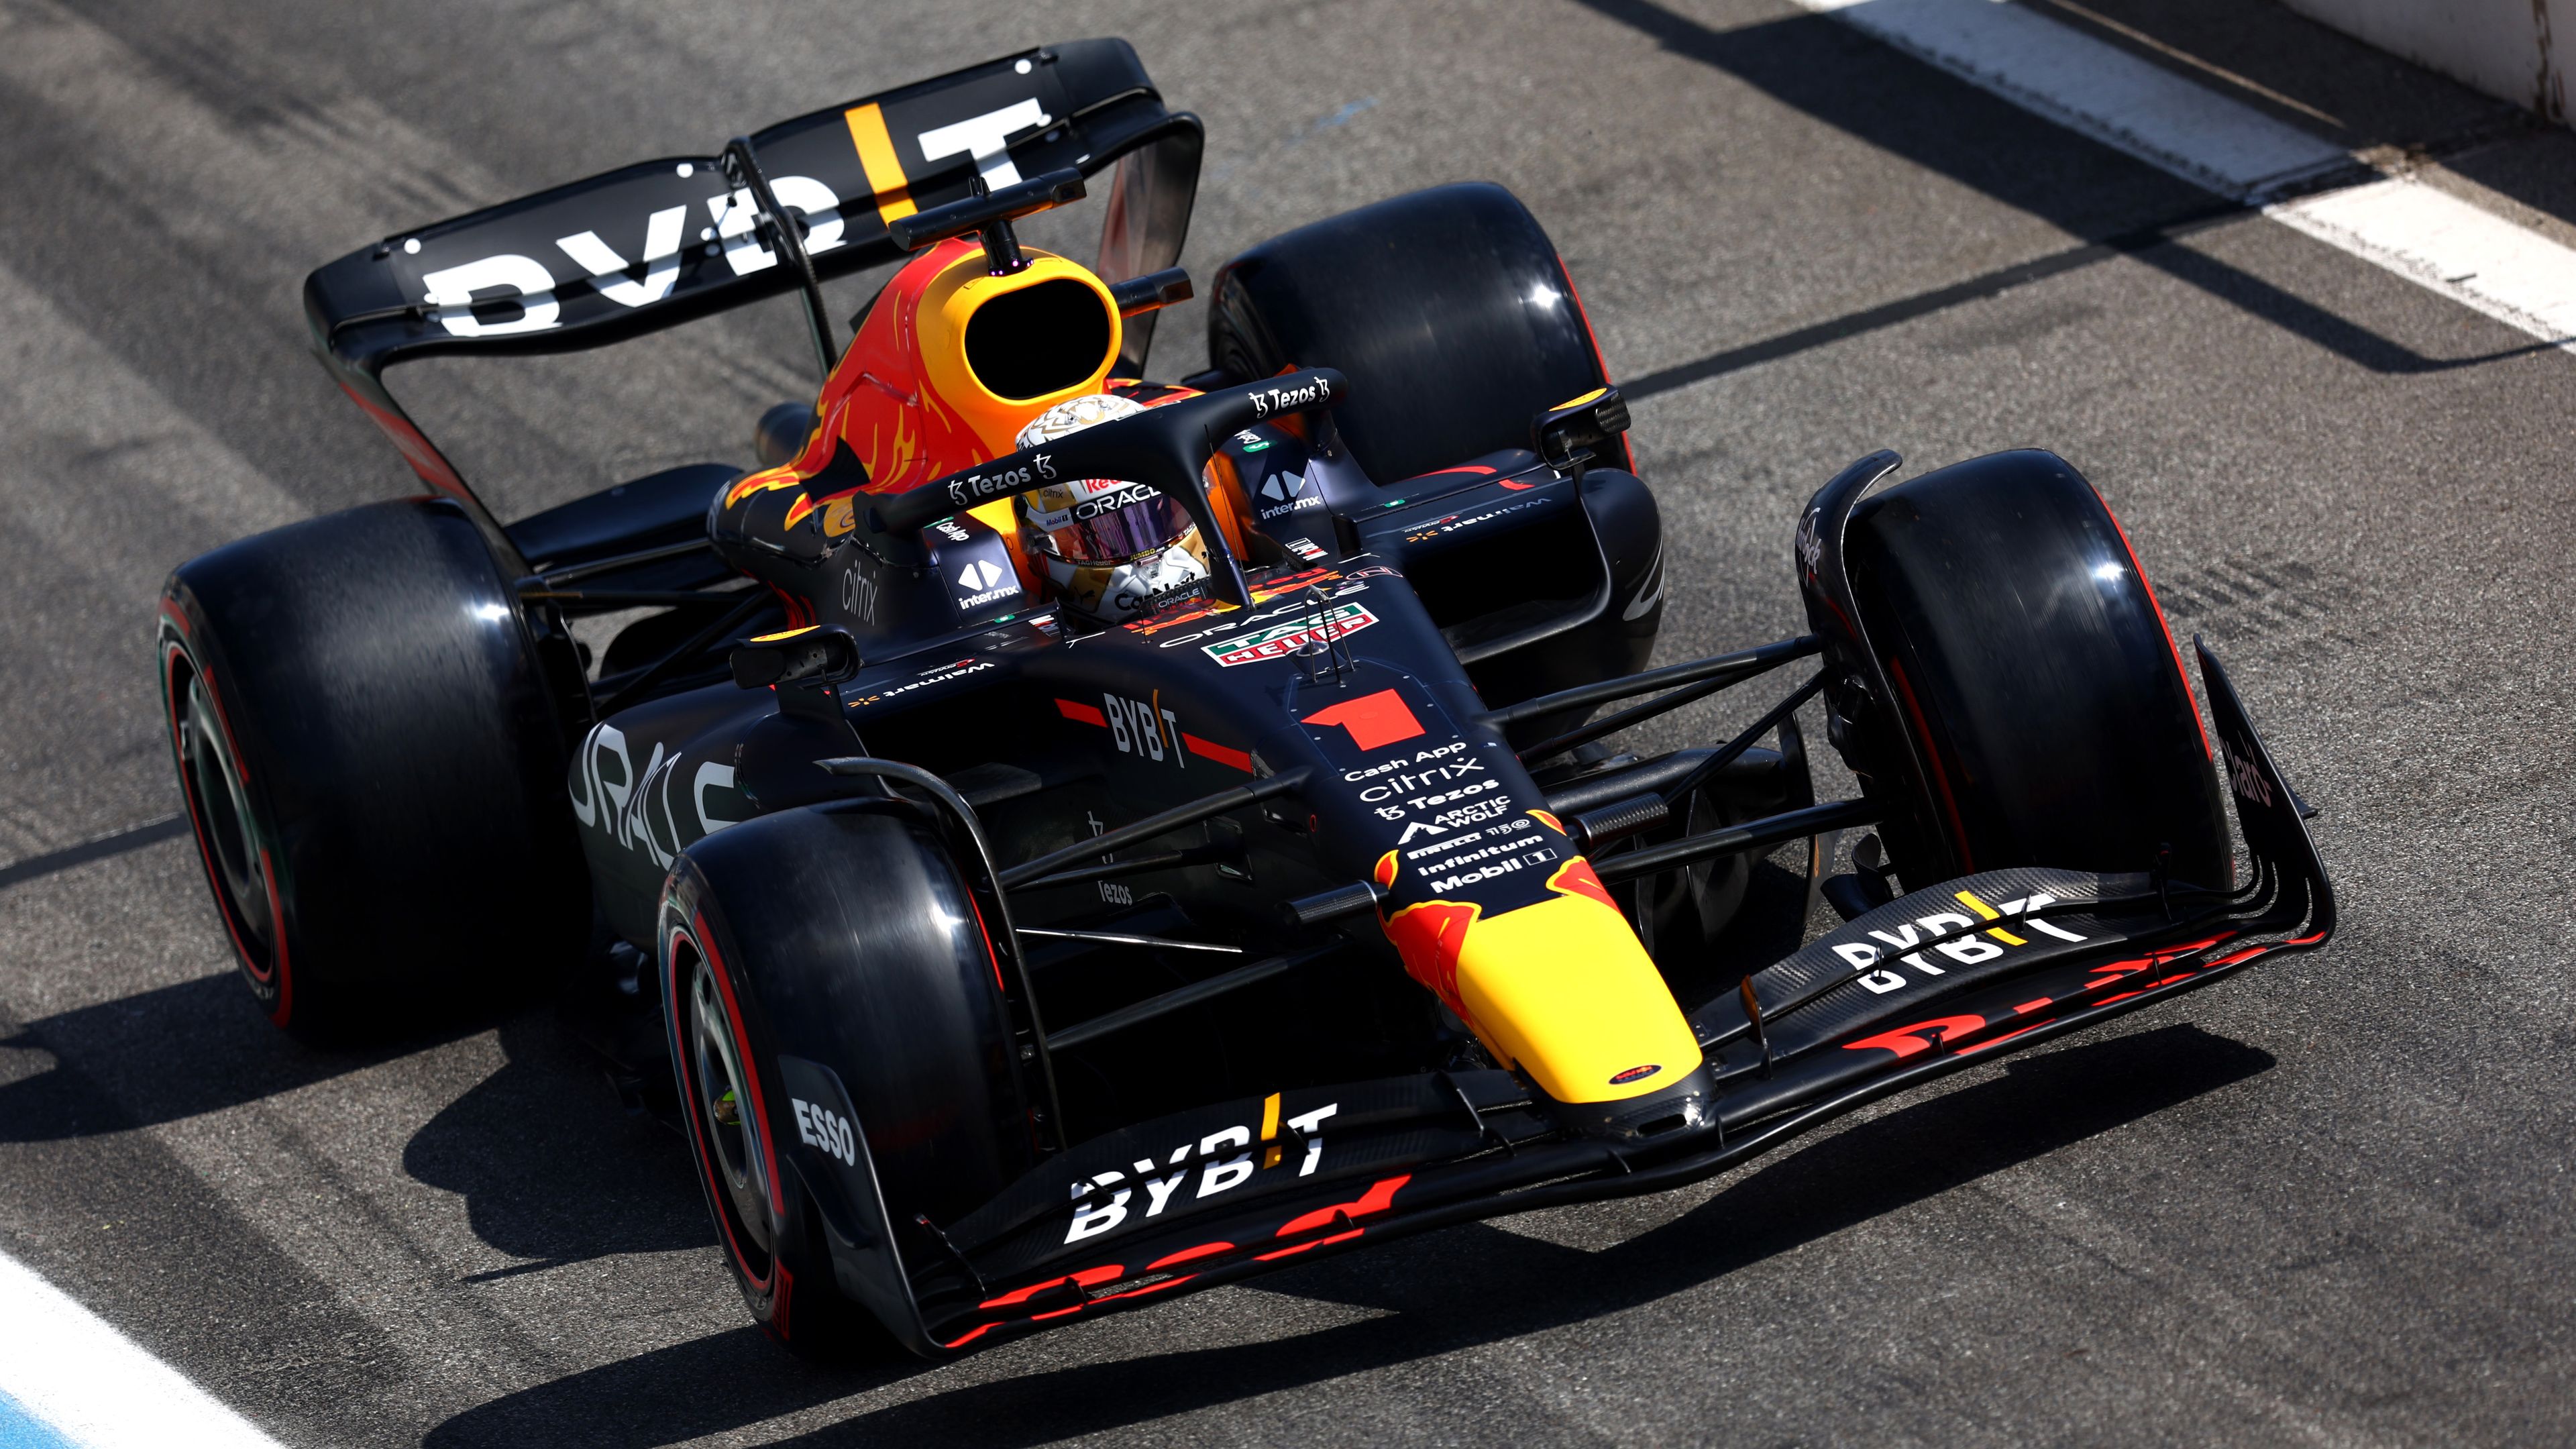 Max Verstappen during the French Grand Prix at the Paul Ricard Circuit. Photo: Clive Rose